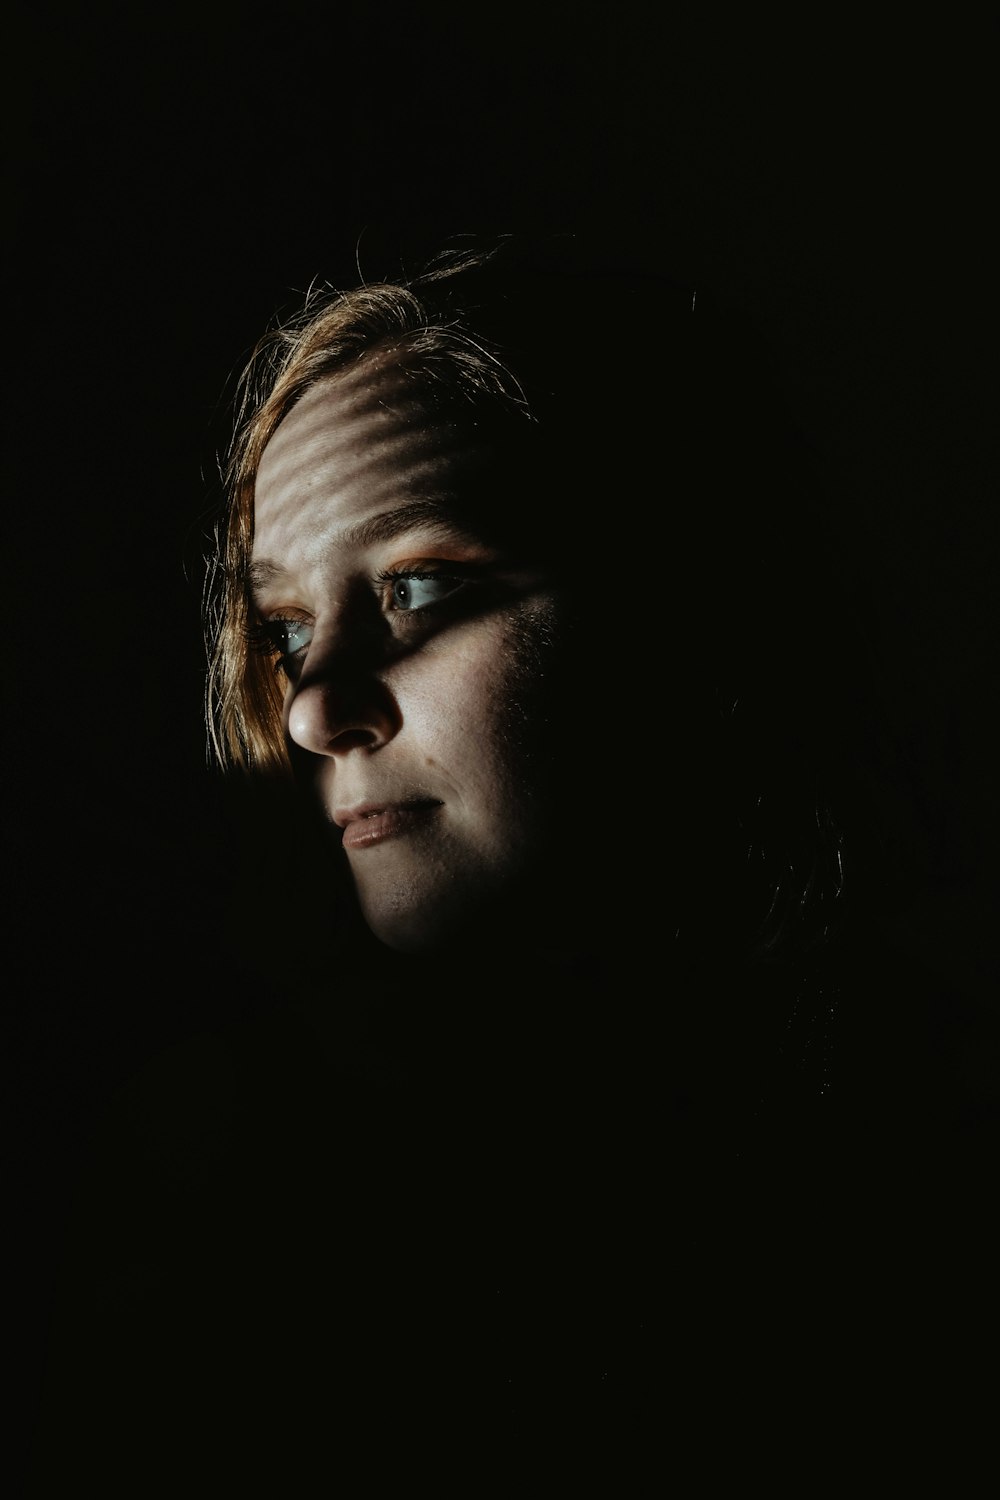 a woman's face is shown in the dark